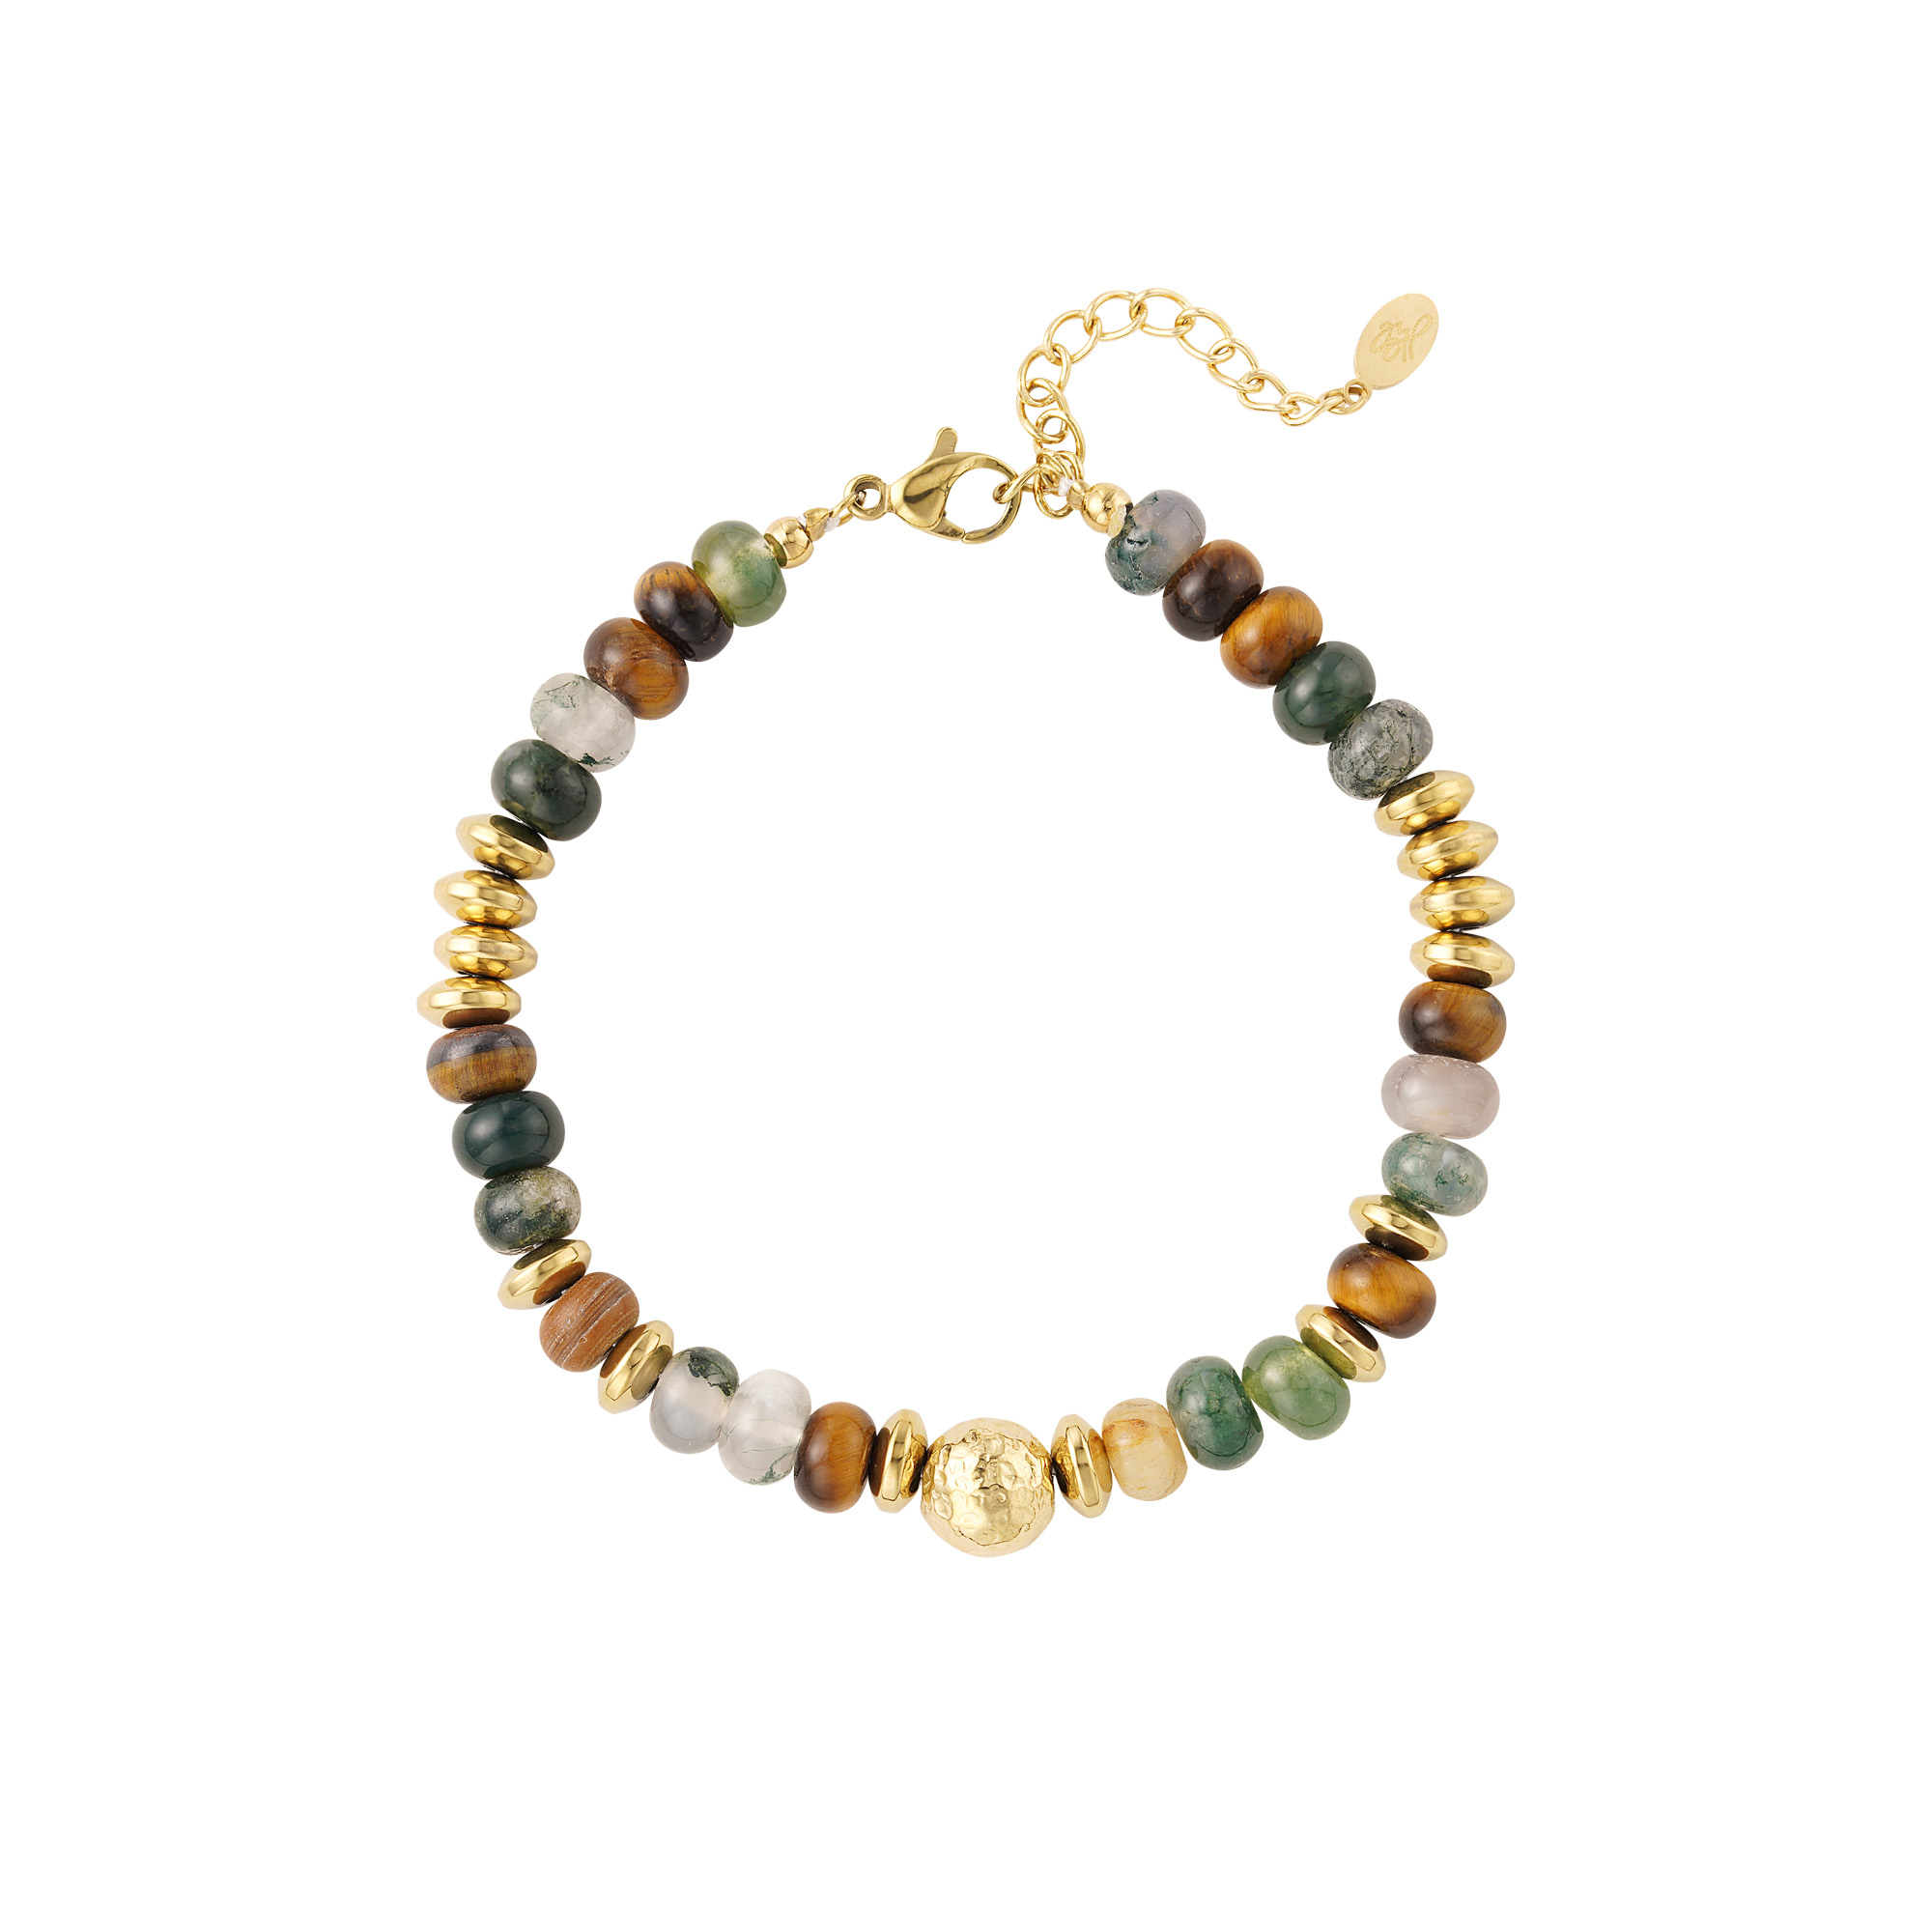 Necklace with multi-colored stone beads